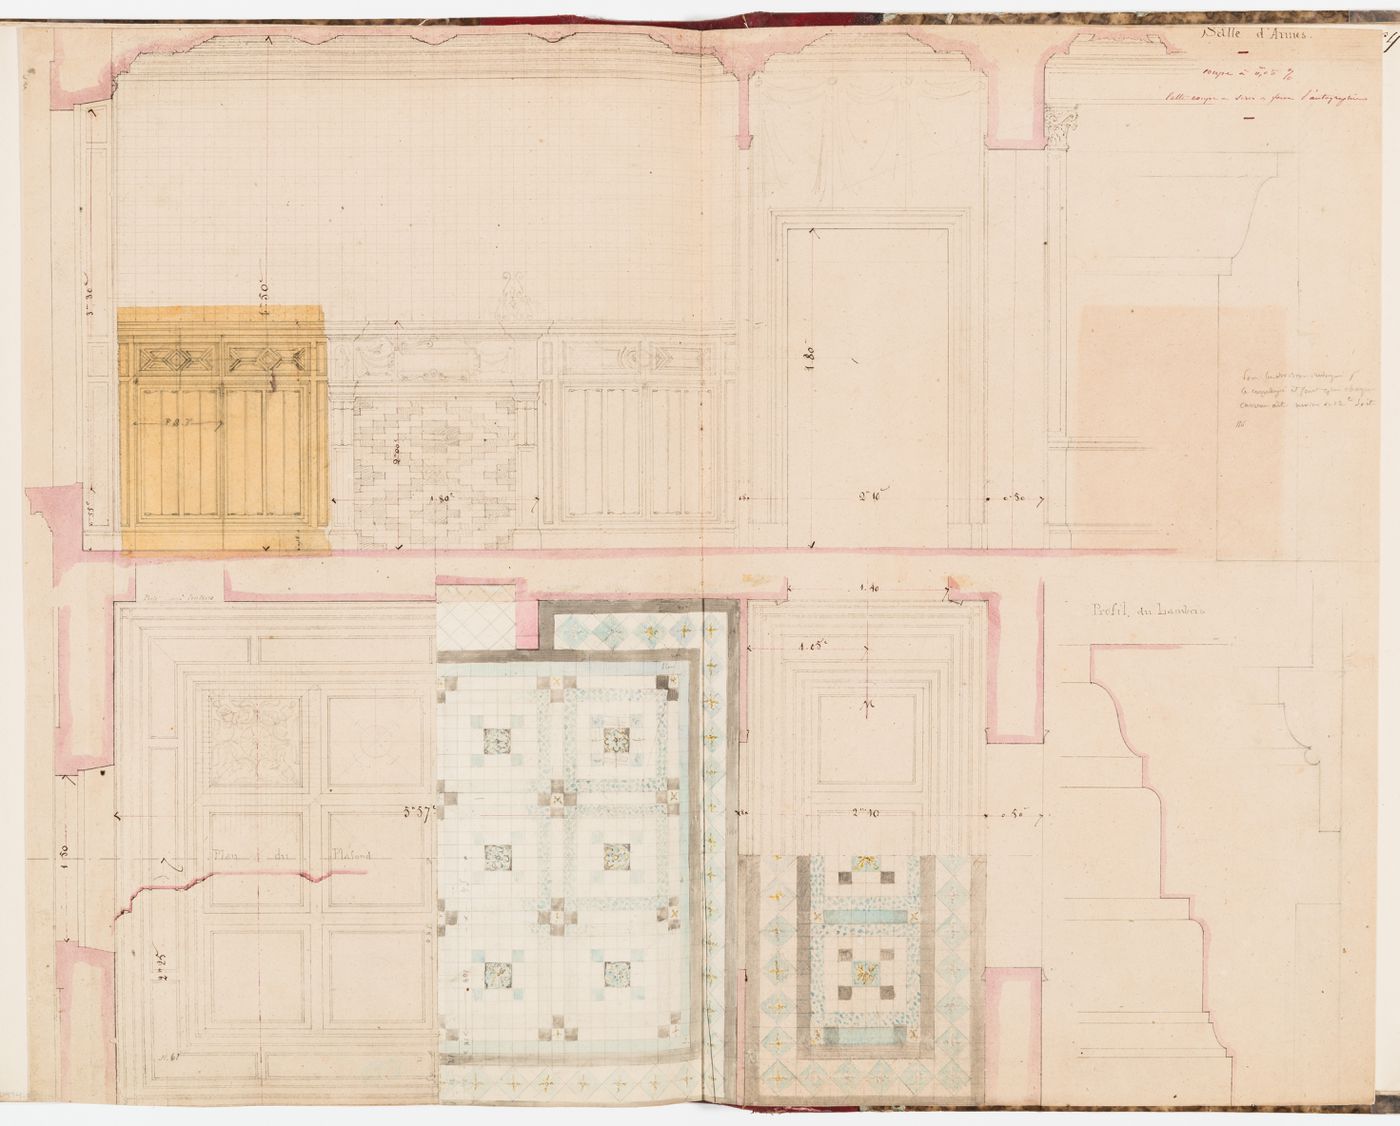 Interior elevation, reflected ceiling plan, plan for the floor tile pattern, and moulding profiles for the "salle sur la cour" or the "salle d'armes" on the second floor, Hôtel Soltykoff